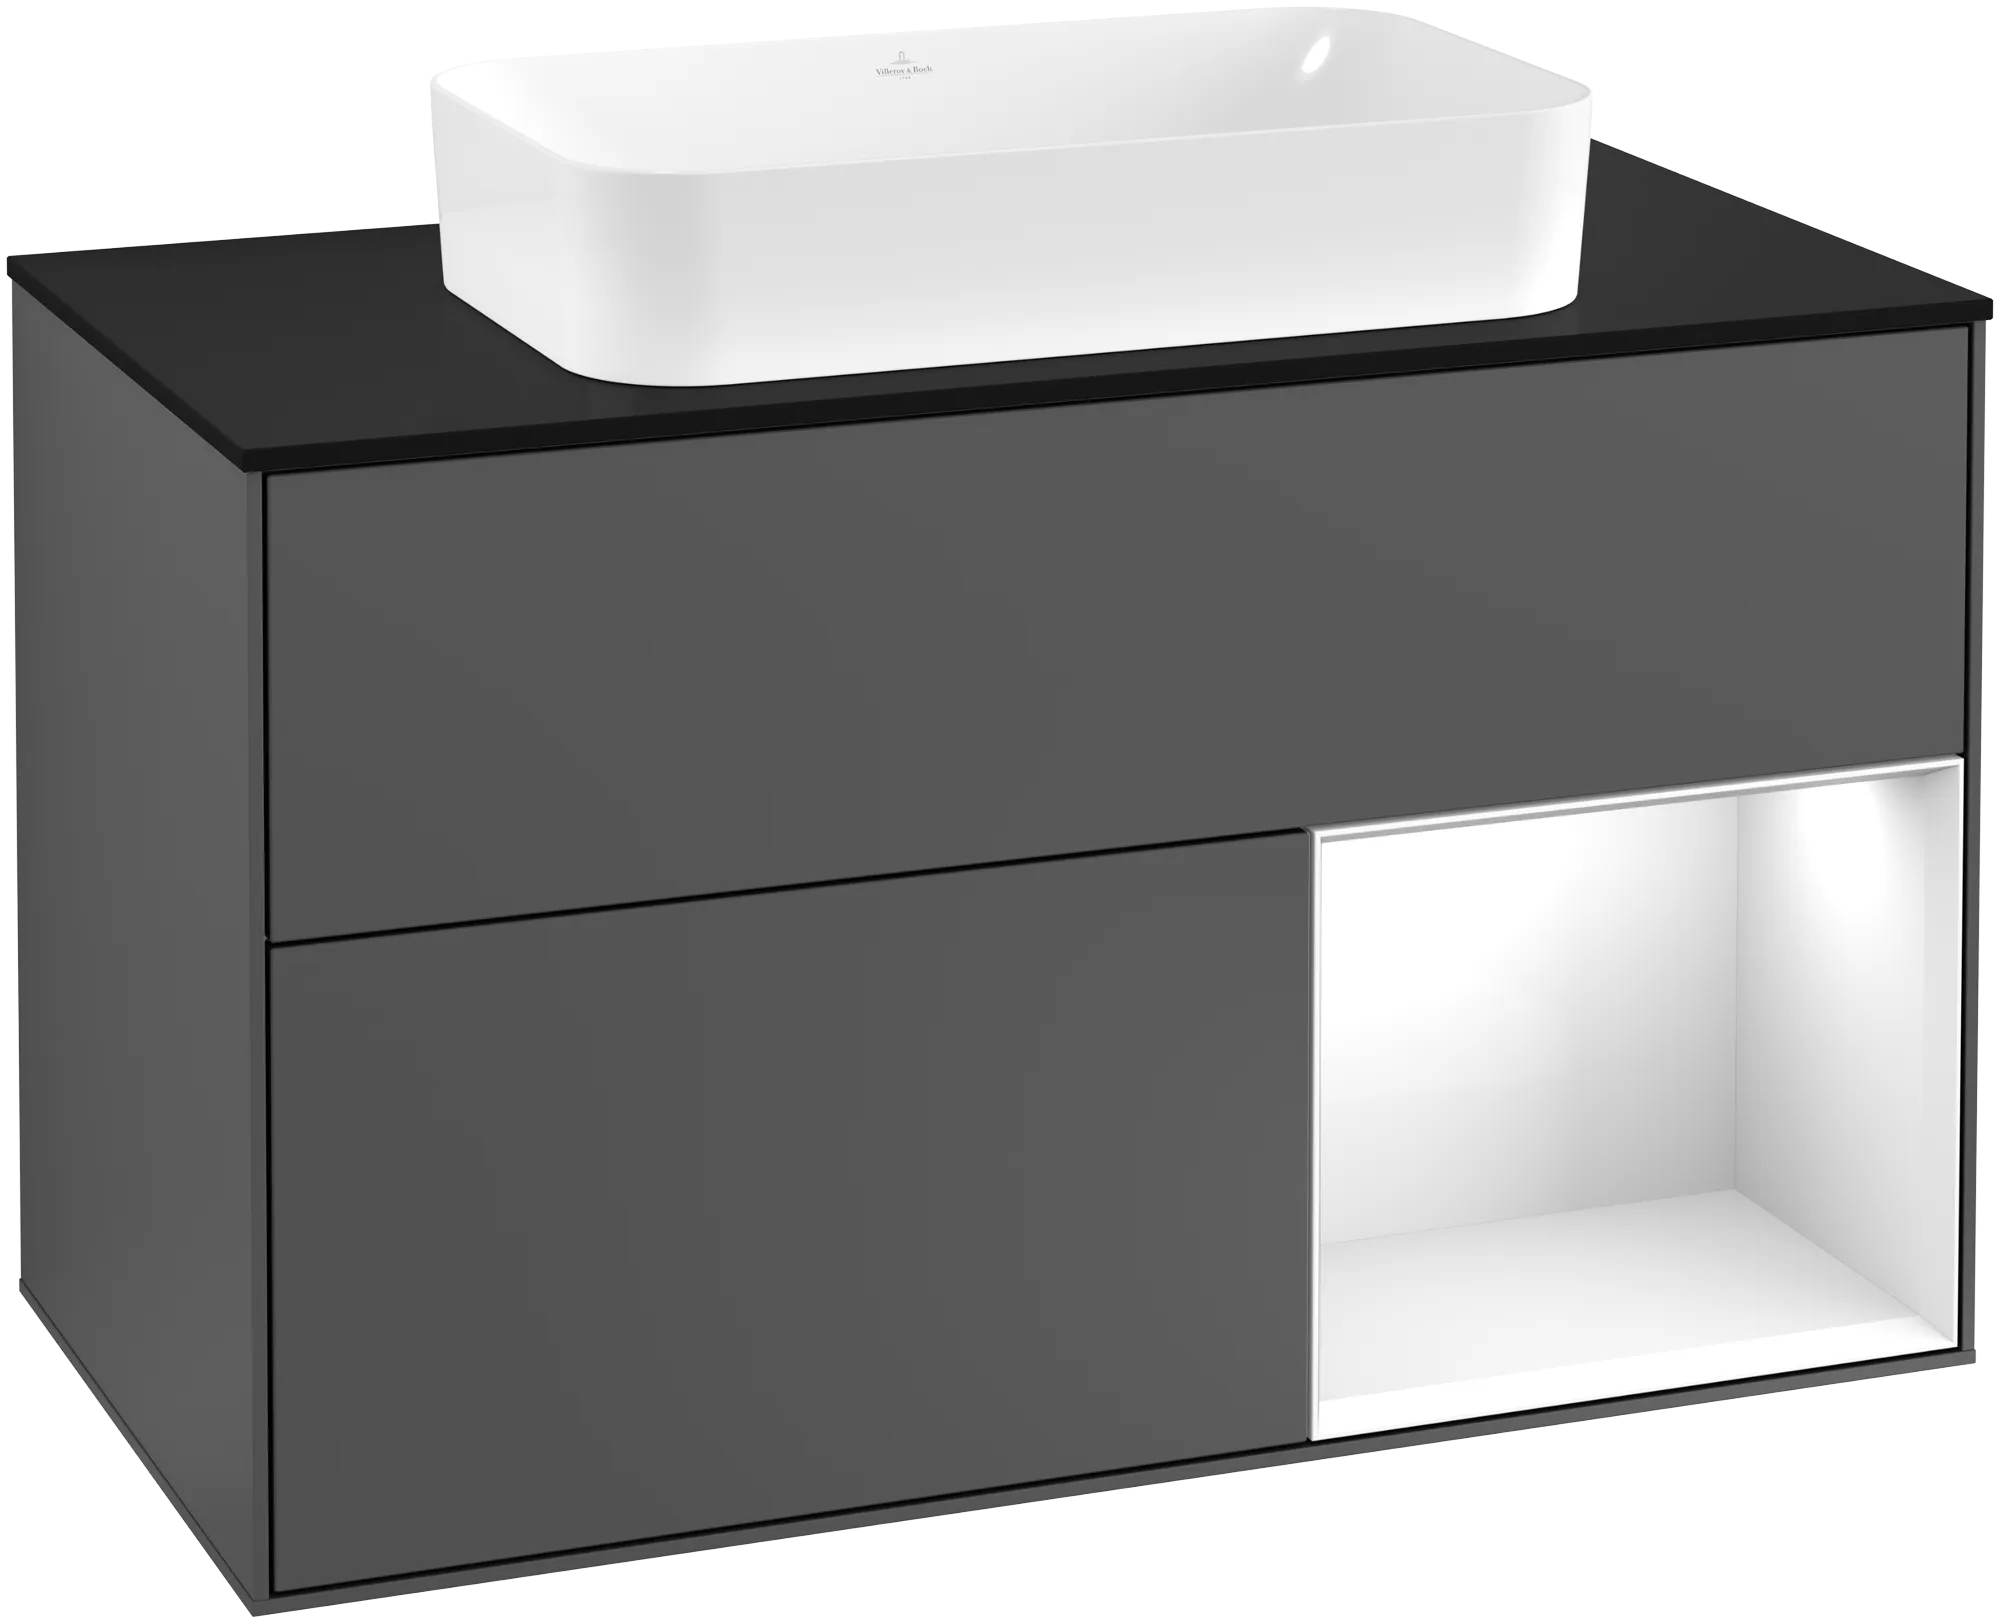 Зображення з  VILLEROY BOCH Finion Vanity unit, with lighting, 2 pull-out compartments, 1000 x 603 x 501 mm, Anthracite Matt Lacquer / Glossy White Lacquer / Glass Black Matt #G252GFGK